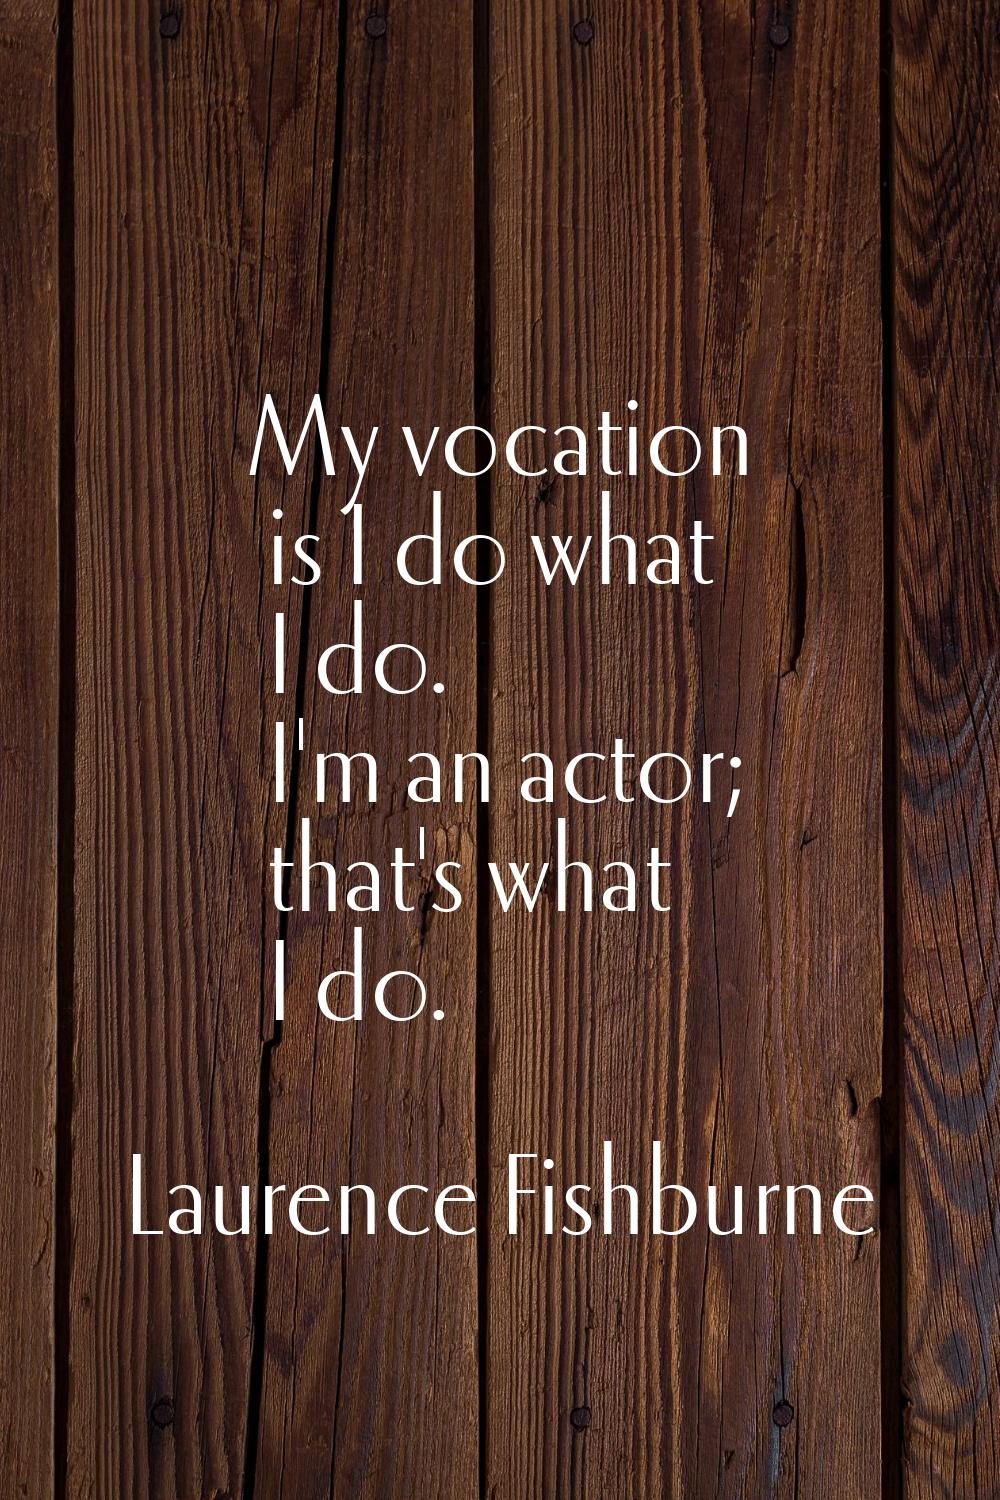 My vocation is I do what I do. I'm an actor; that's what I do.